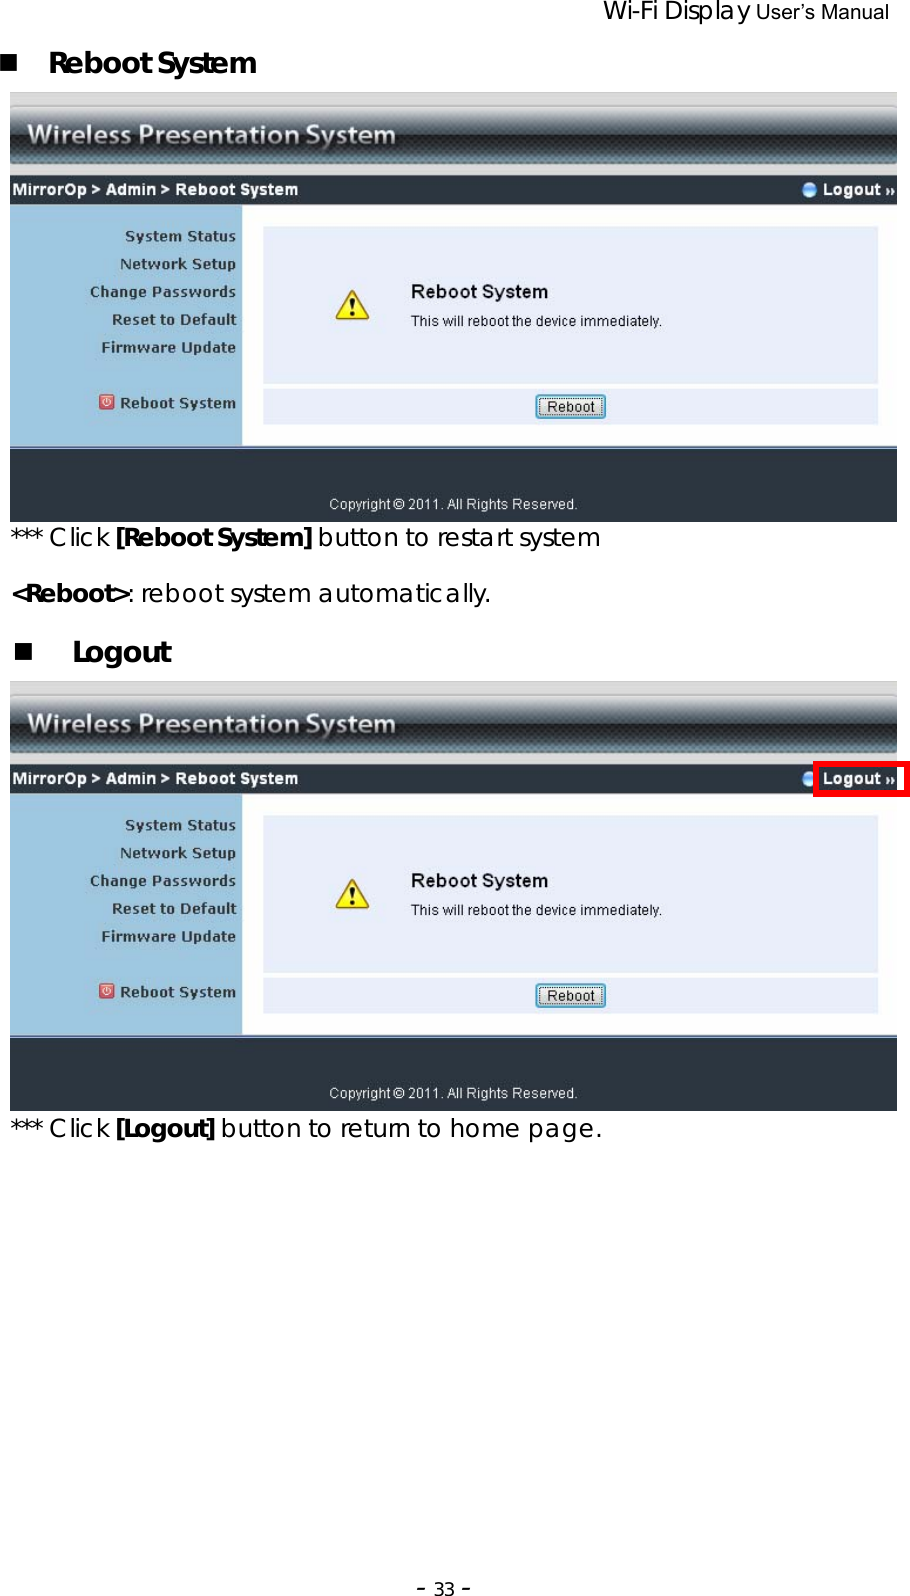                 Wi-Fi Display User’s Manual  ‐33‐ Reboot System  *** Click [Reboot System] button to restart system  &lt;Reboot&gt;: reboot system automatically.  Logout  *** Click [Logout] button to return to home page.